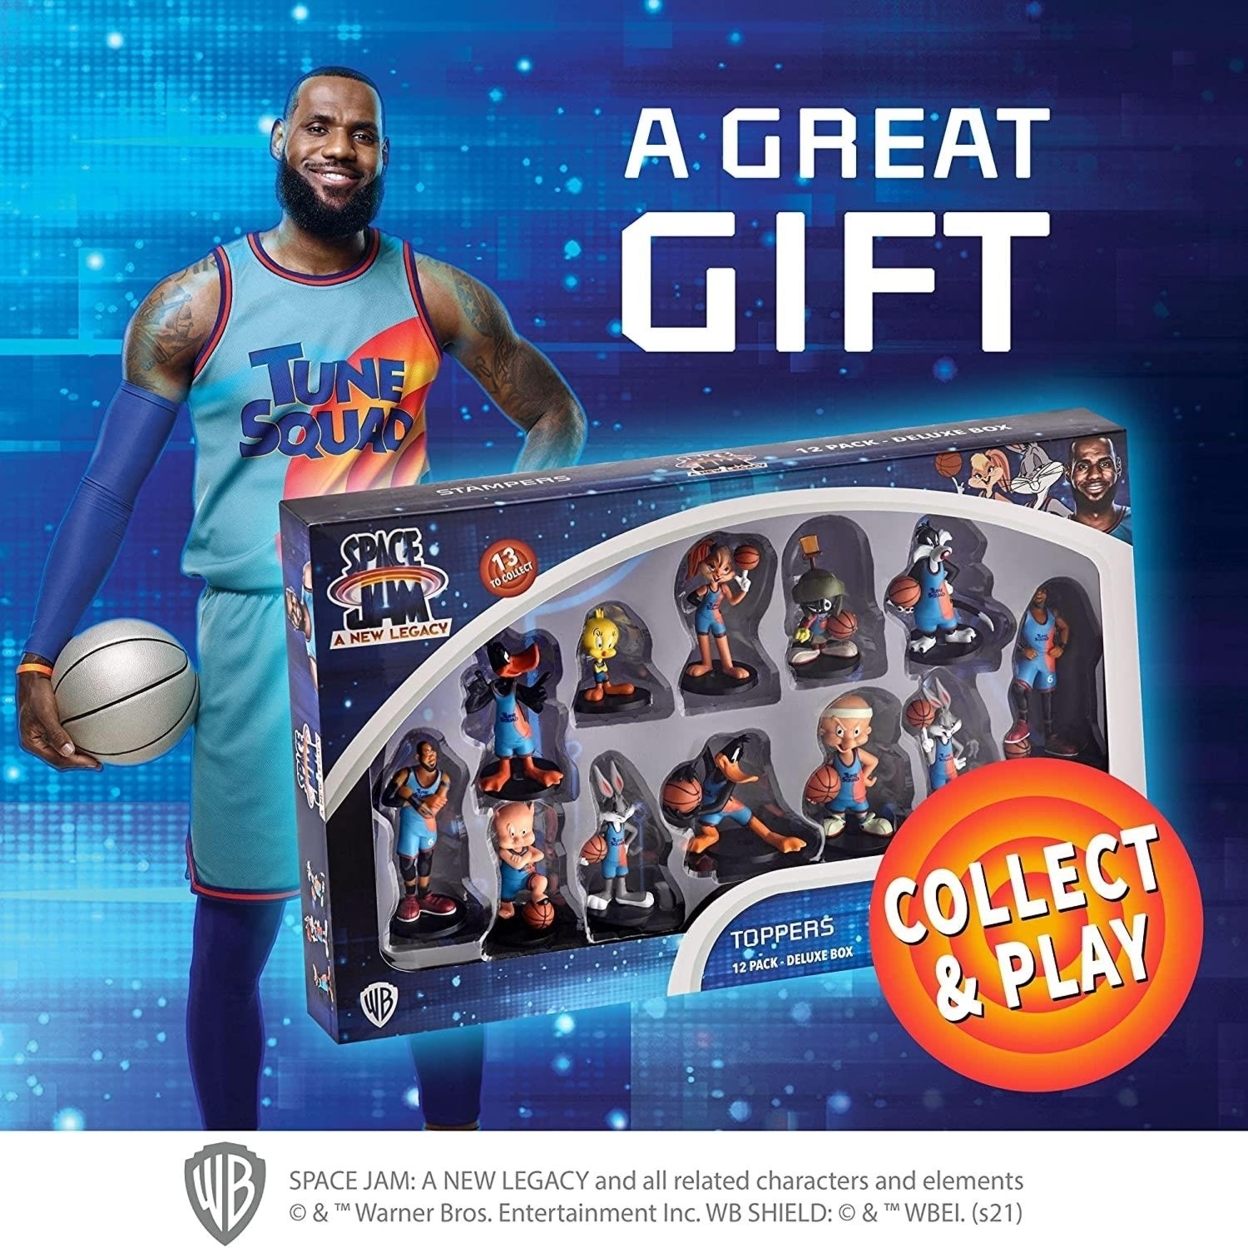 Space Jam A New Legacy Pencil Toppers 12pk Movie Characters Deluxe Box Set PMI International